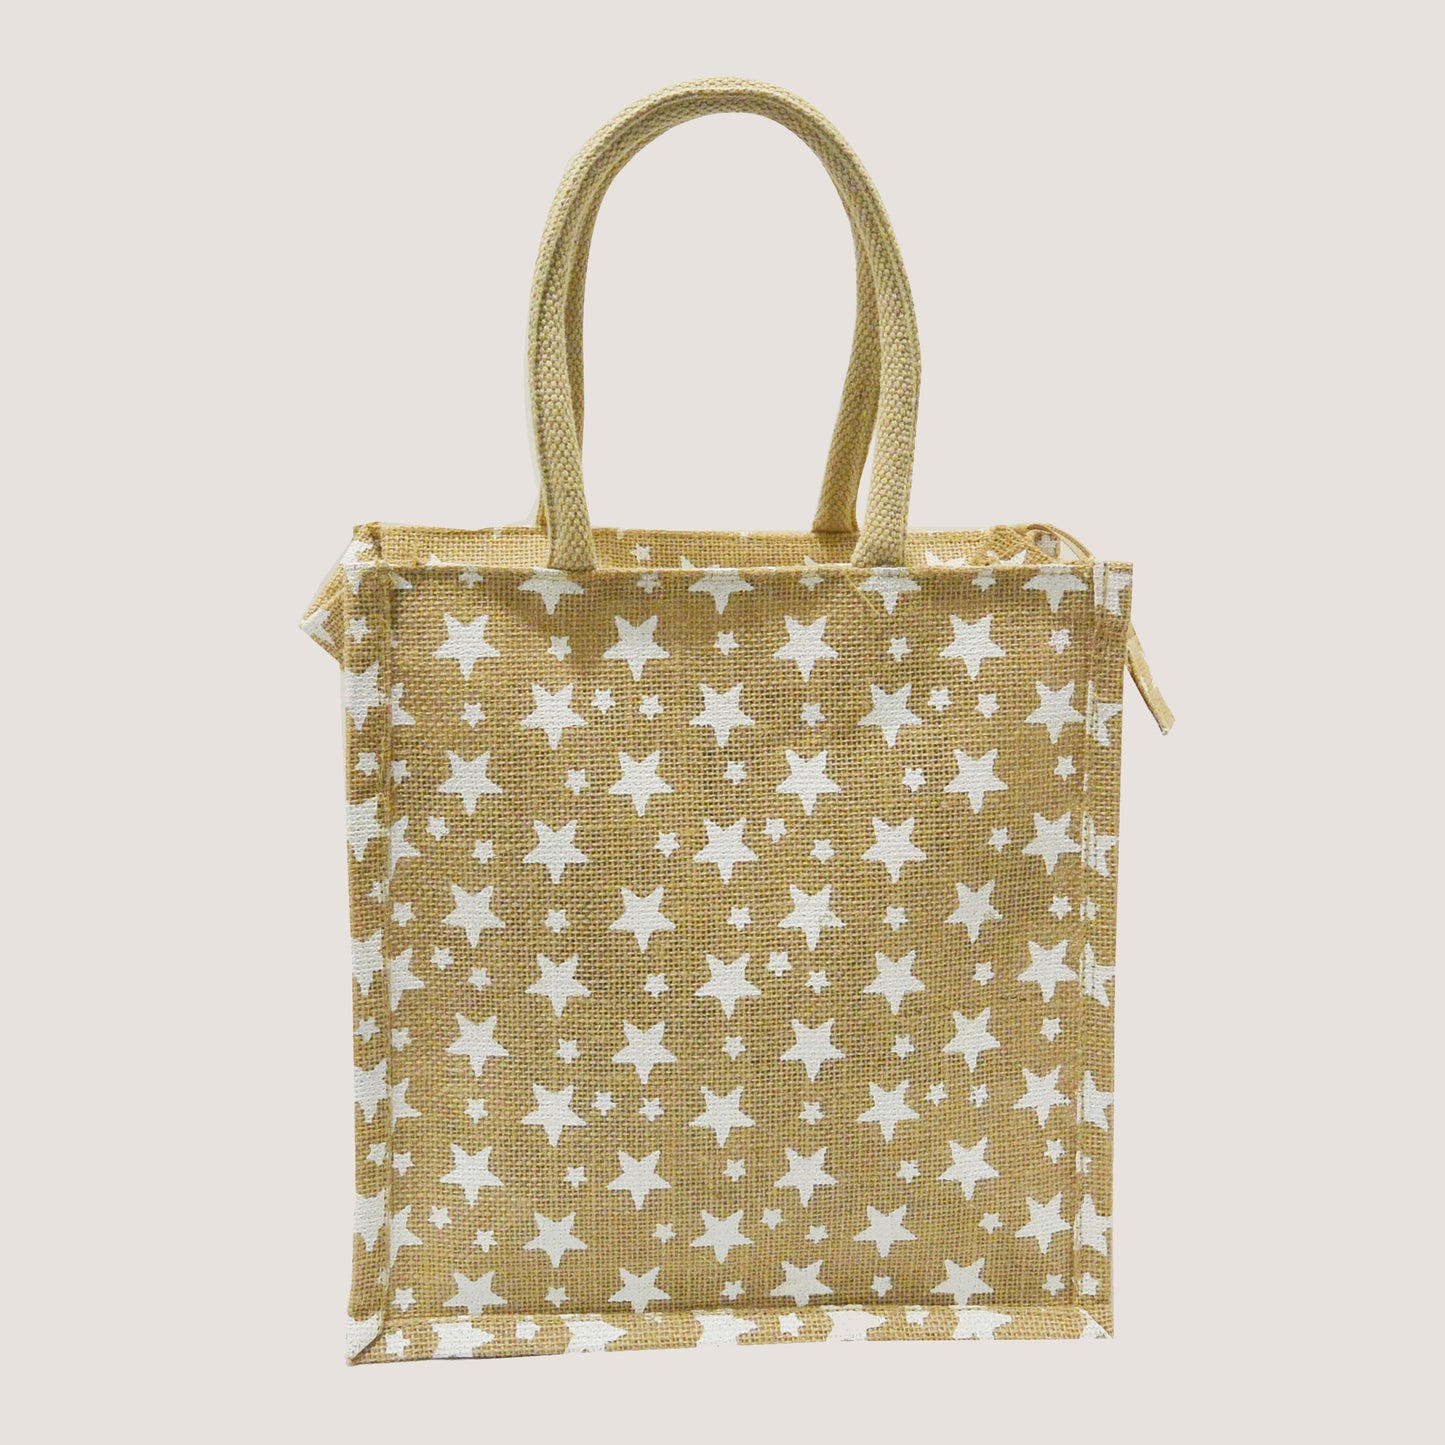 EARTHBAGS PRINTED JUTE LUNCH BAG WITH ZIPPER